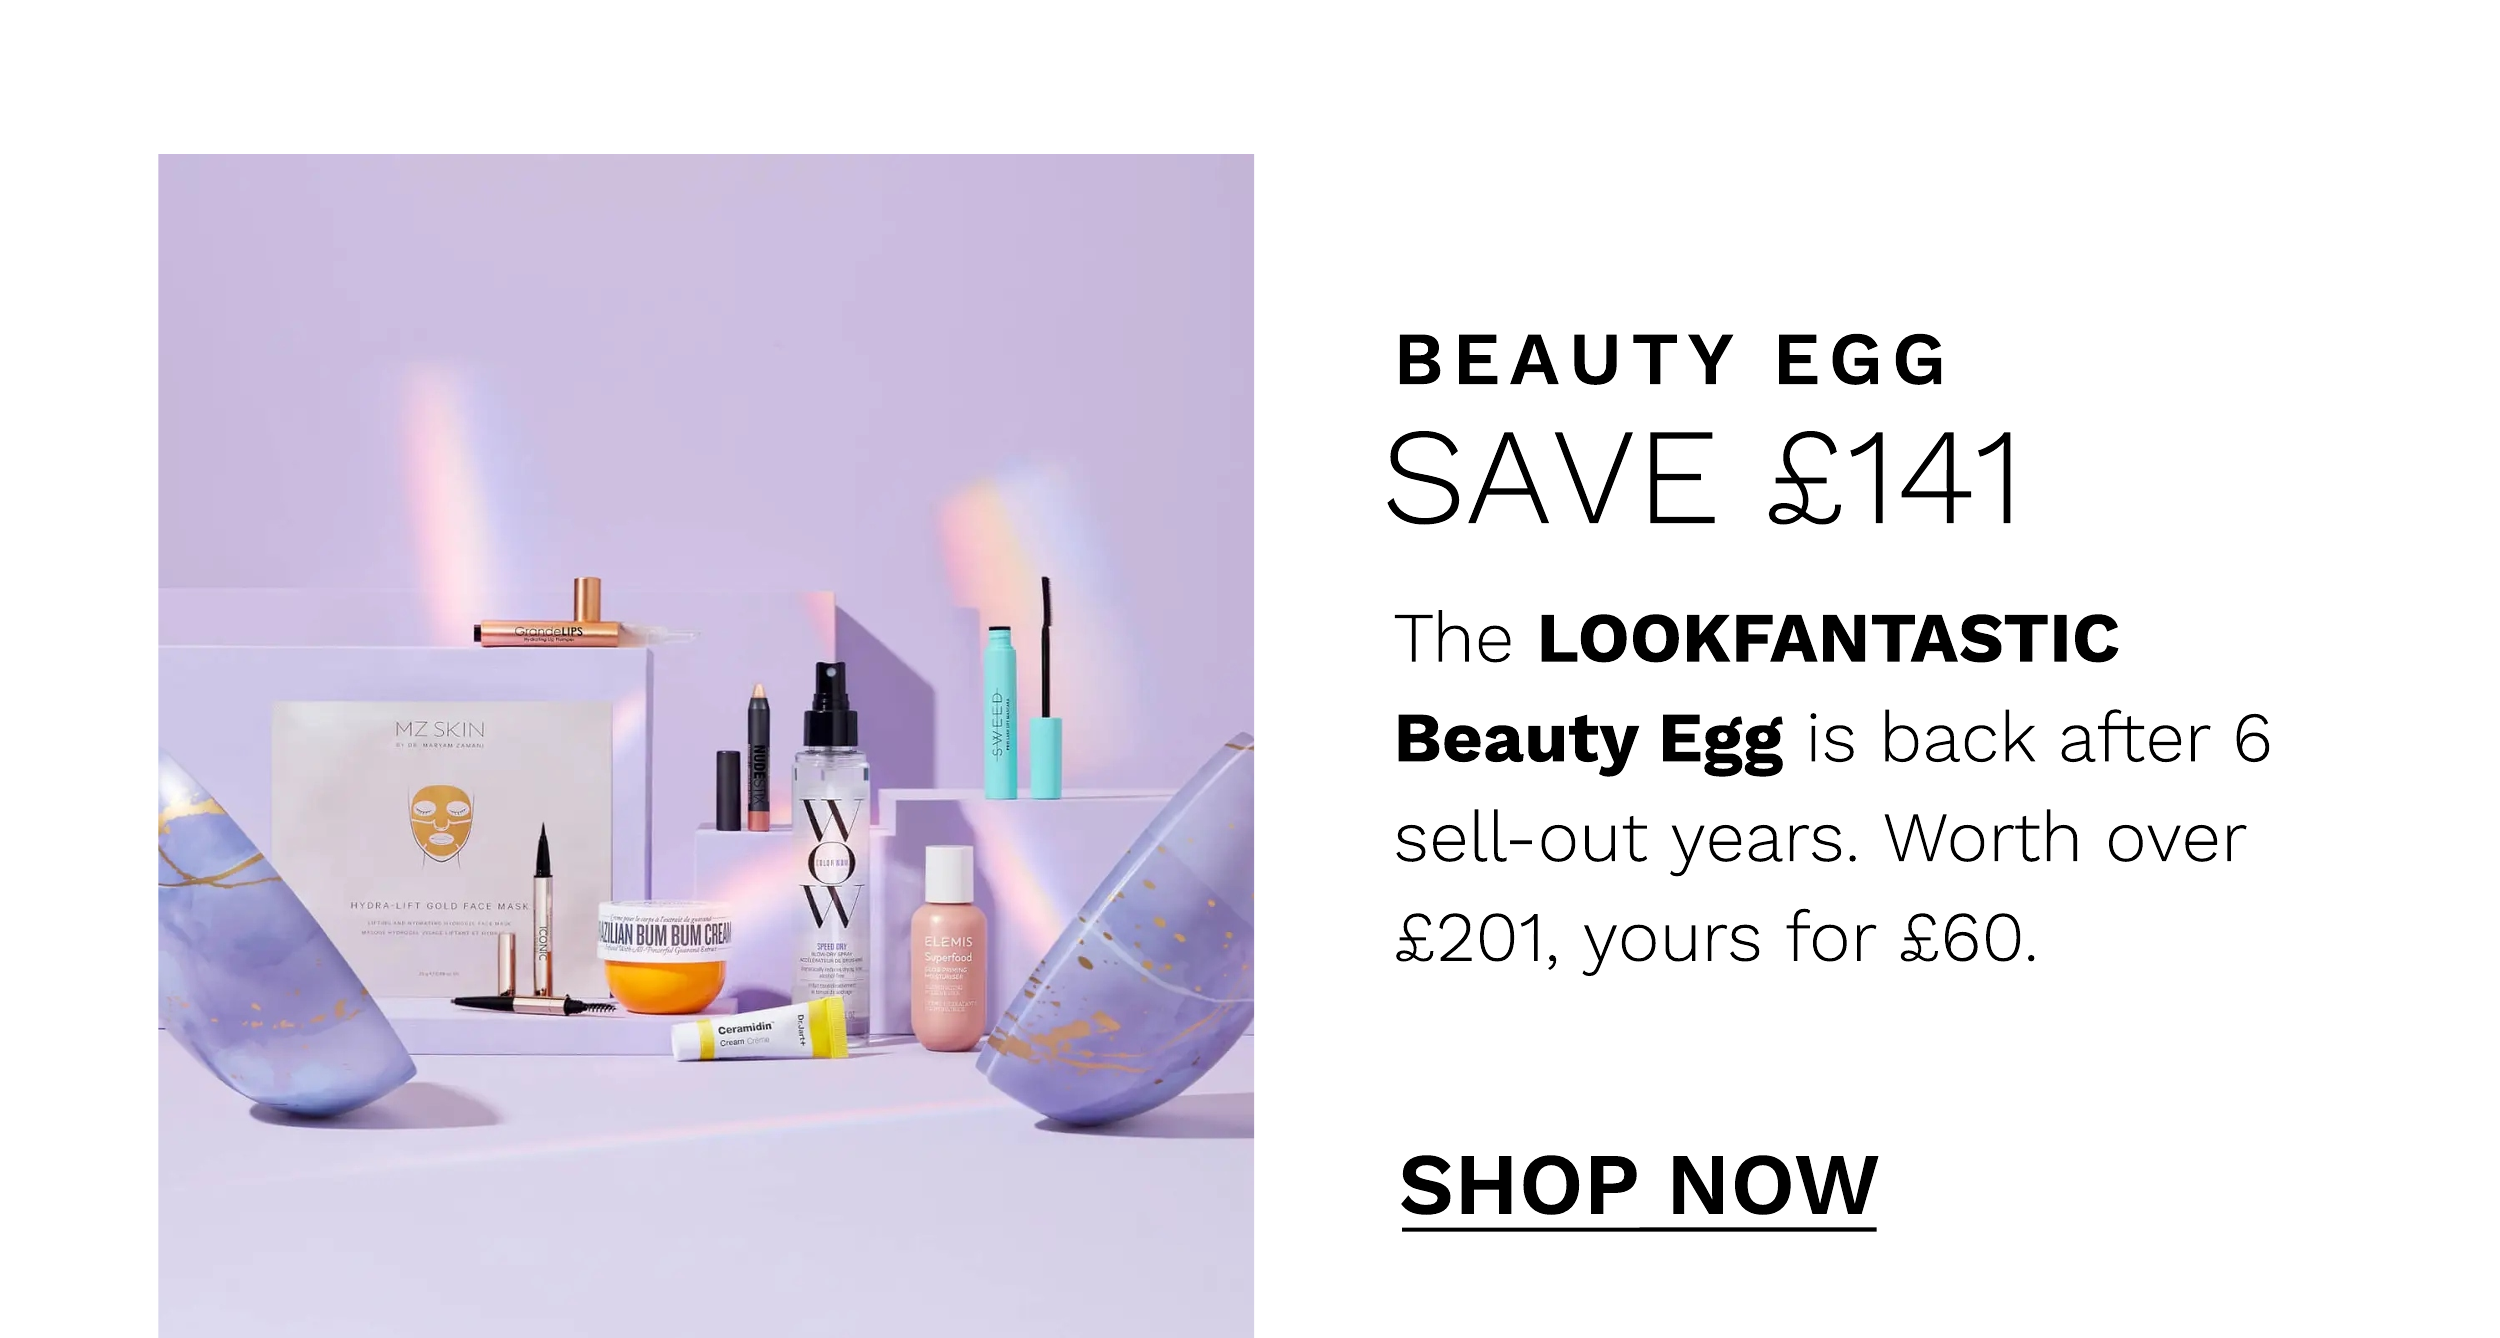  BEAUTY EGG SAVE 141 The LOOKFANTASTIC Beauty Egg is back after 6 sell-out years. Worth over 201, yours for 60. SHOP NOW 